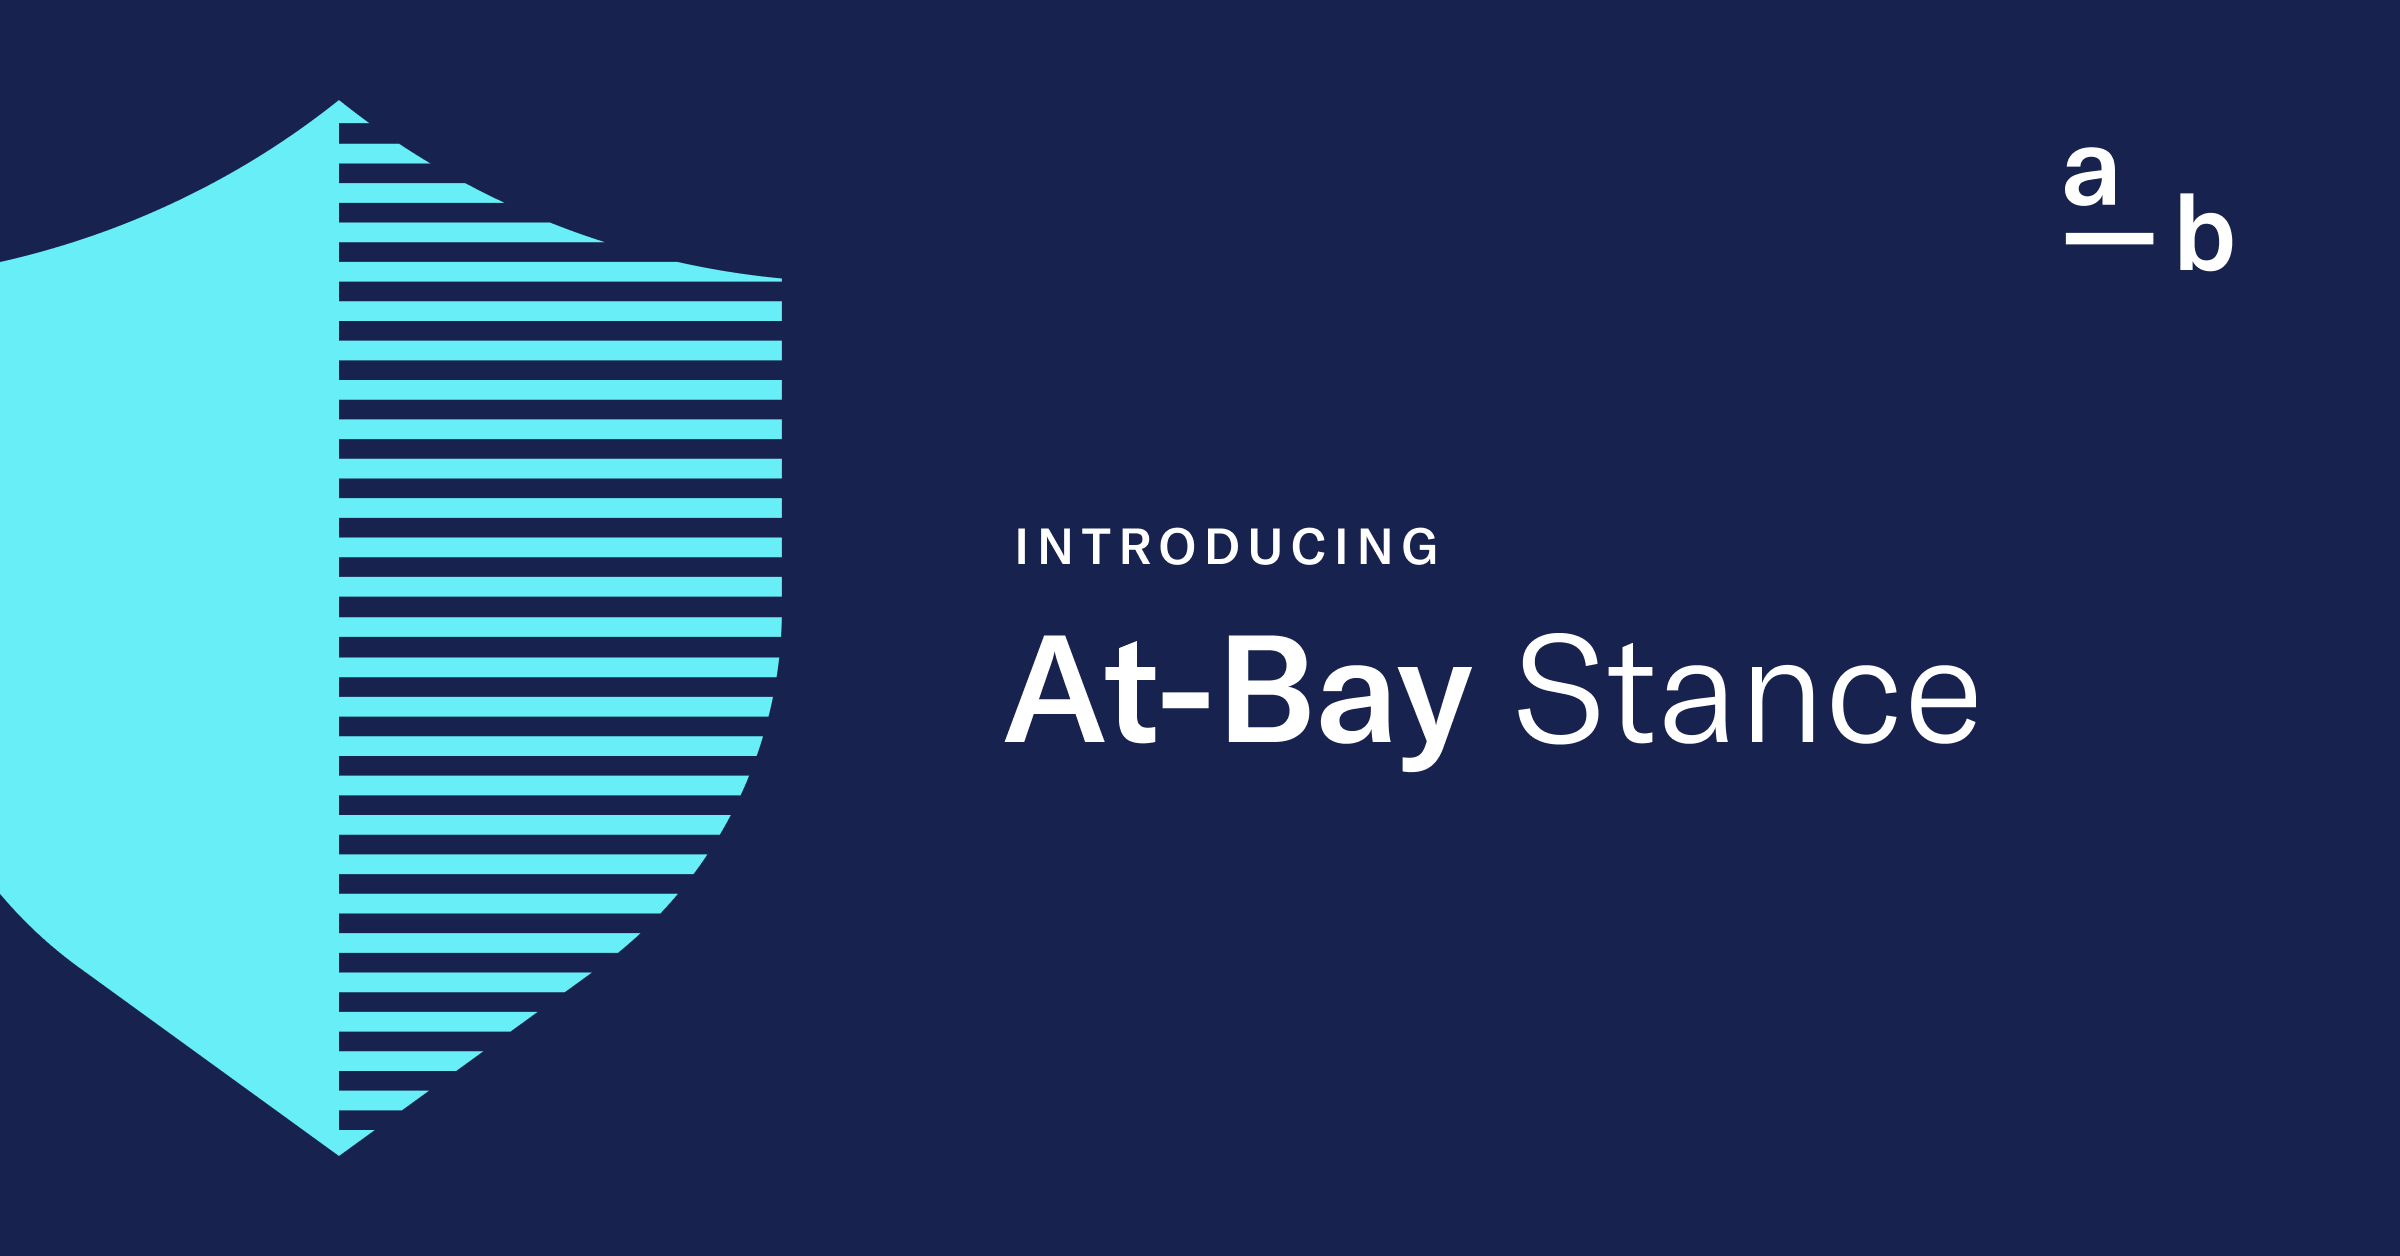 Introducing At-Bay Stance, the World’s First InsurSec Solution to Help SMBs Mitigate Cyber Risk